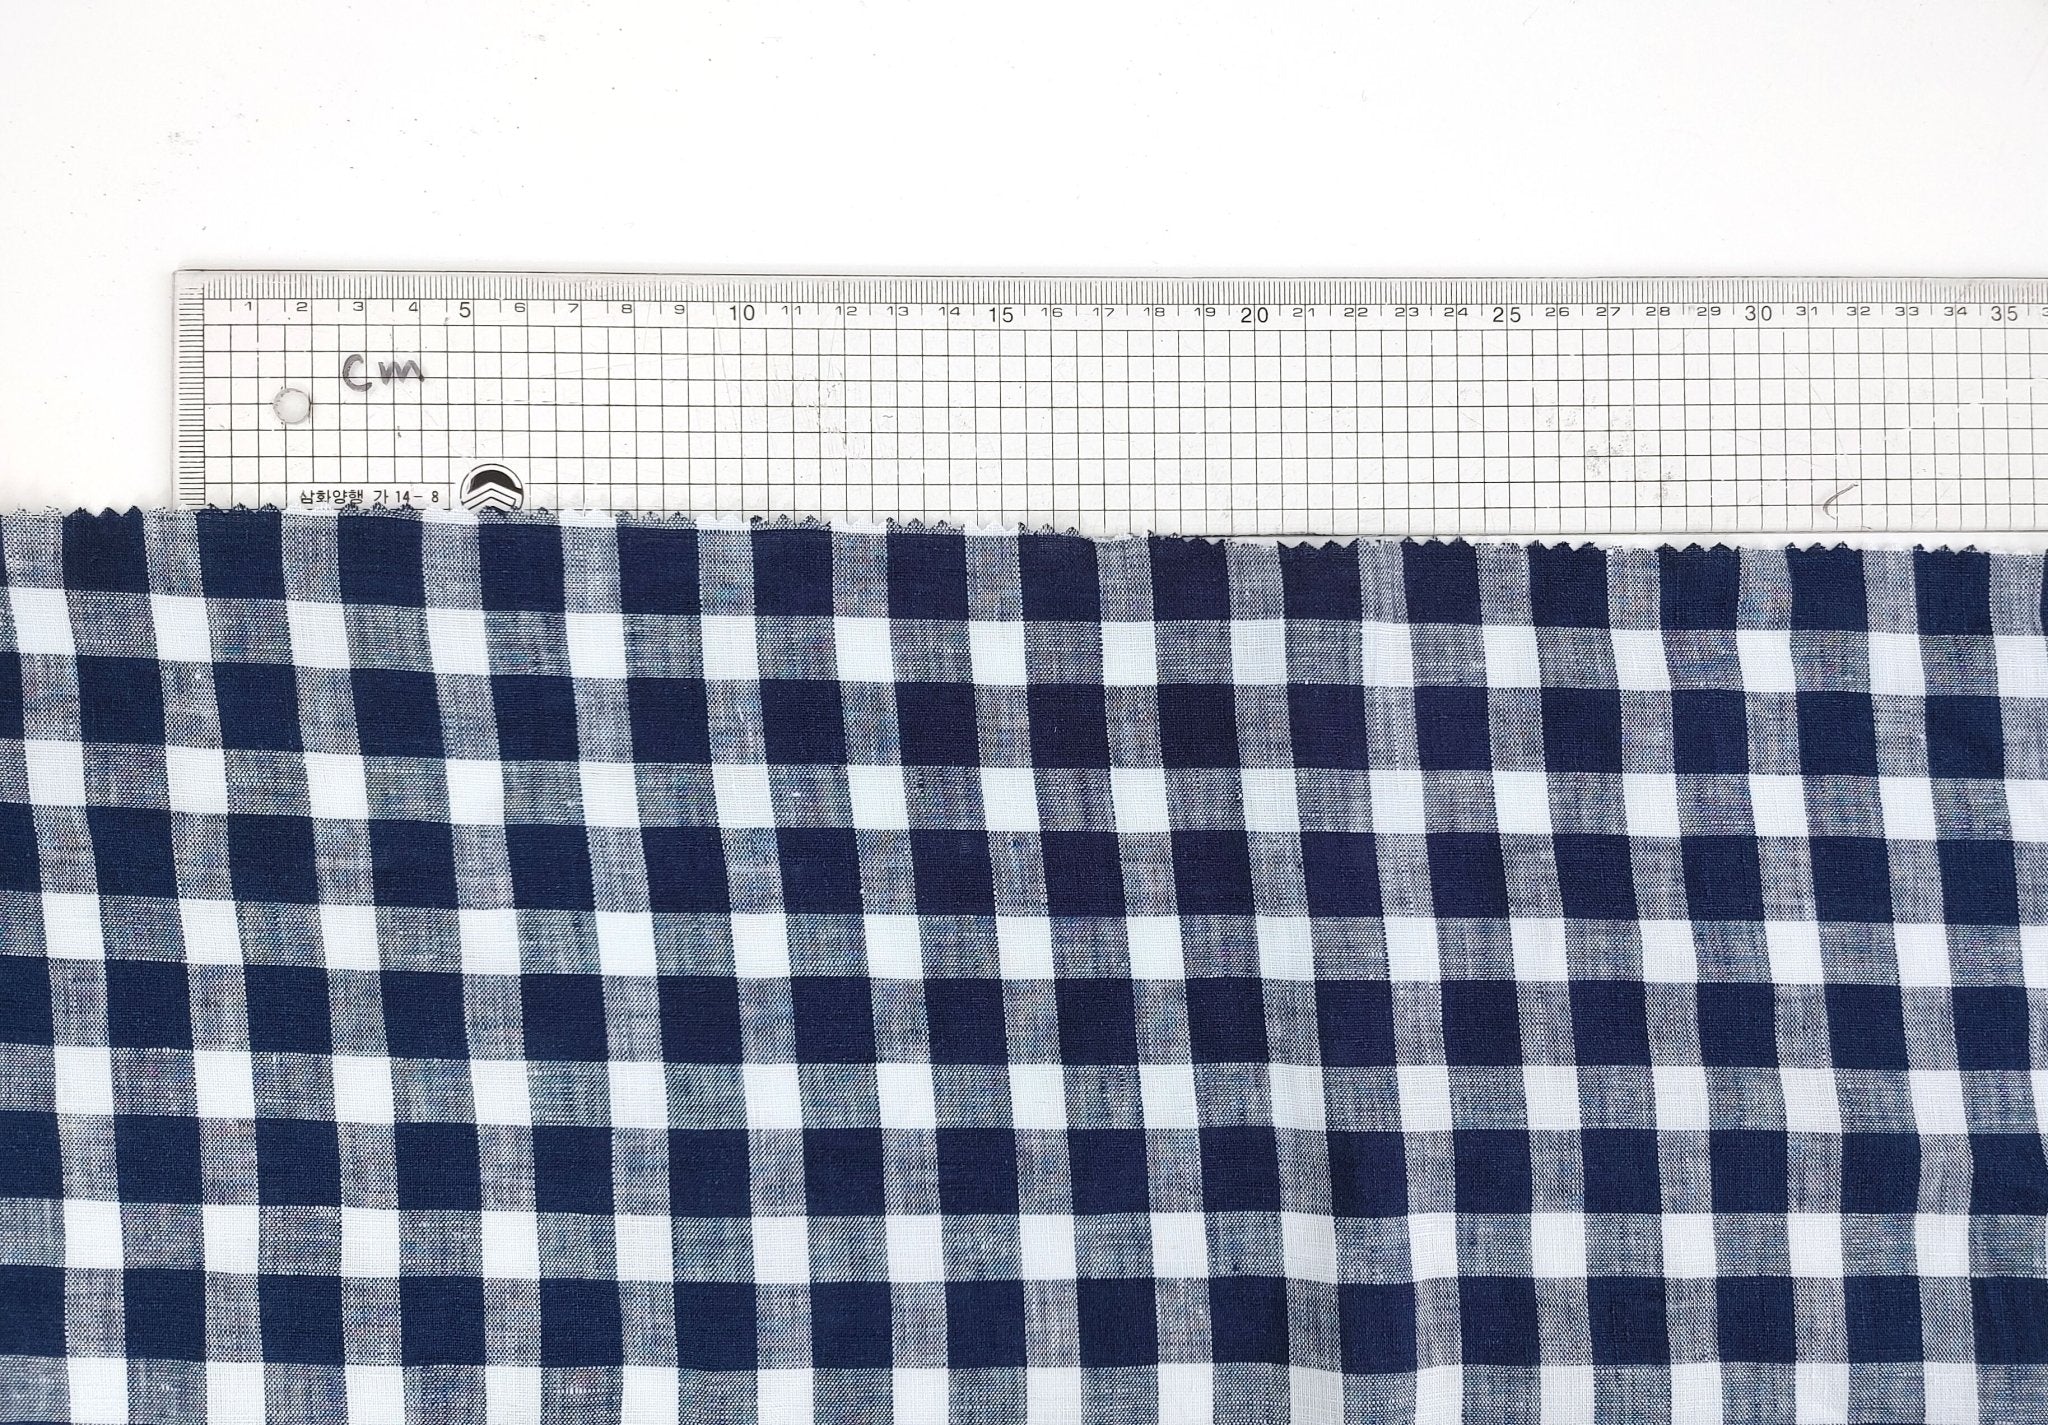 100% Linen Navy Modified Gingham Check Fabric – Lightweight and Timelessly Chic 4407 - The Linen Lab - Navy